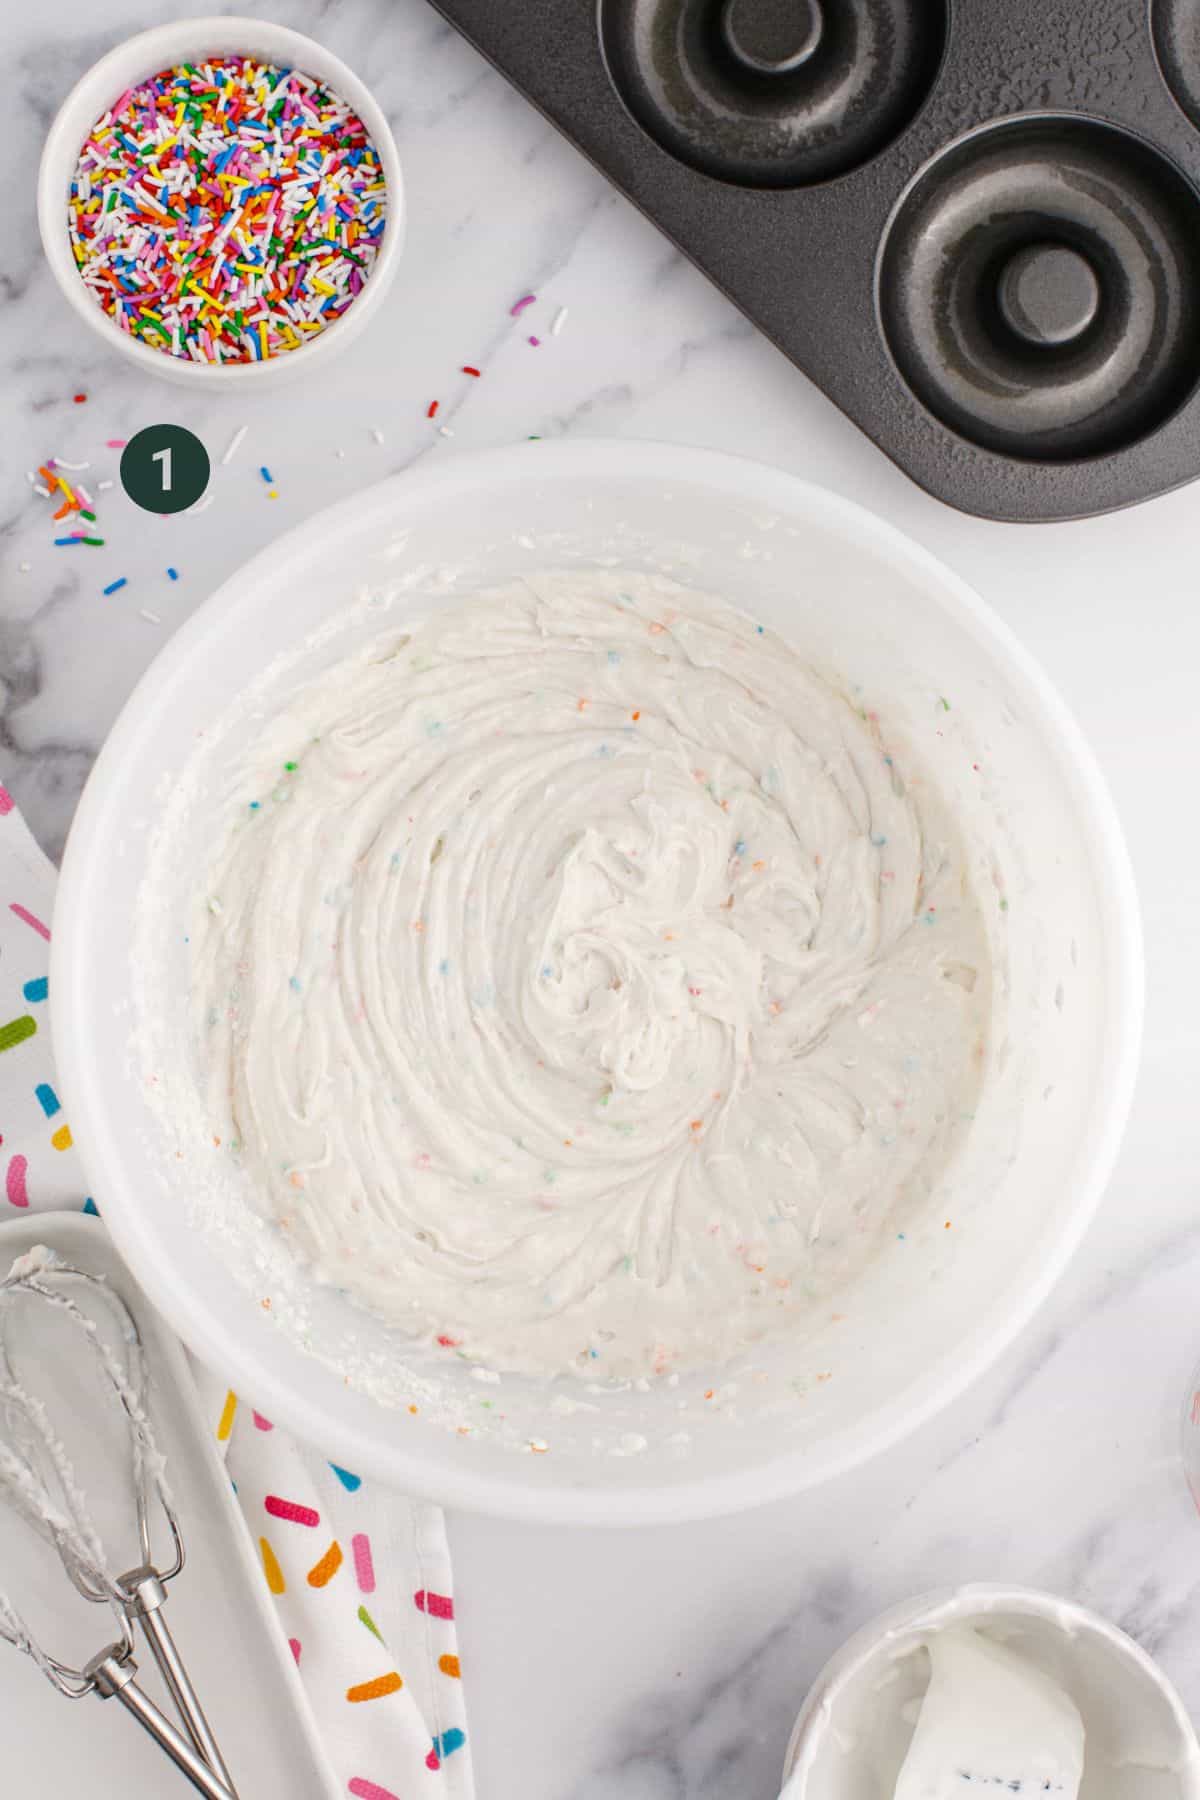 Donut batter completely mixed in a bowl.